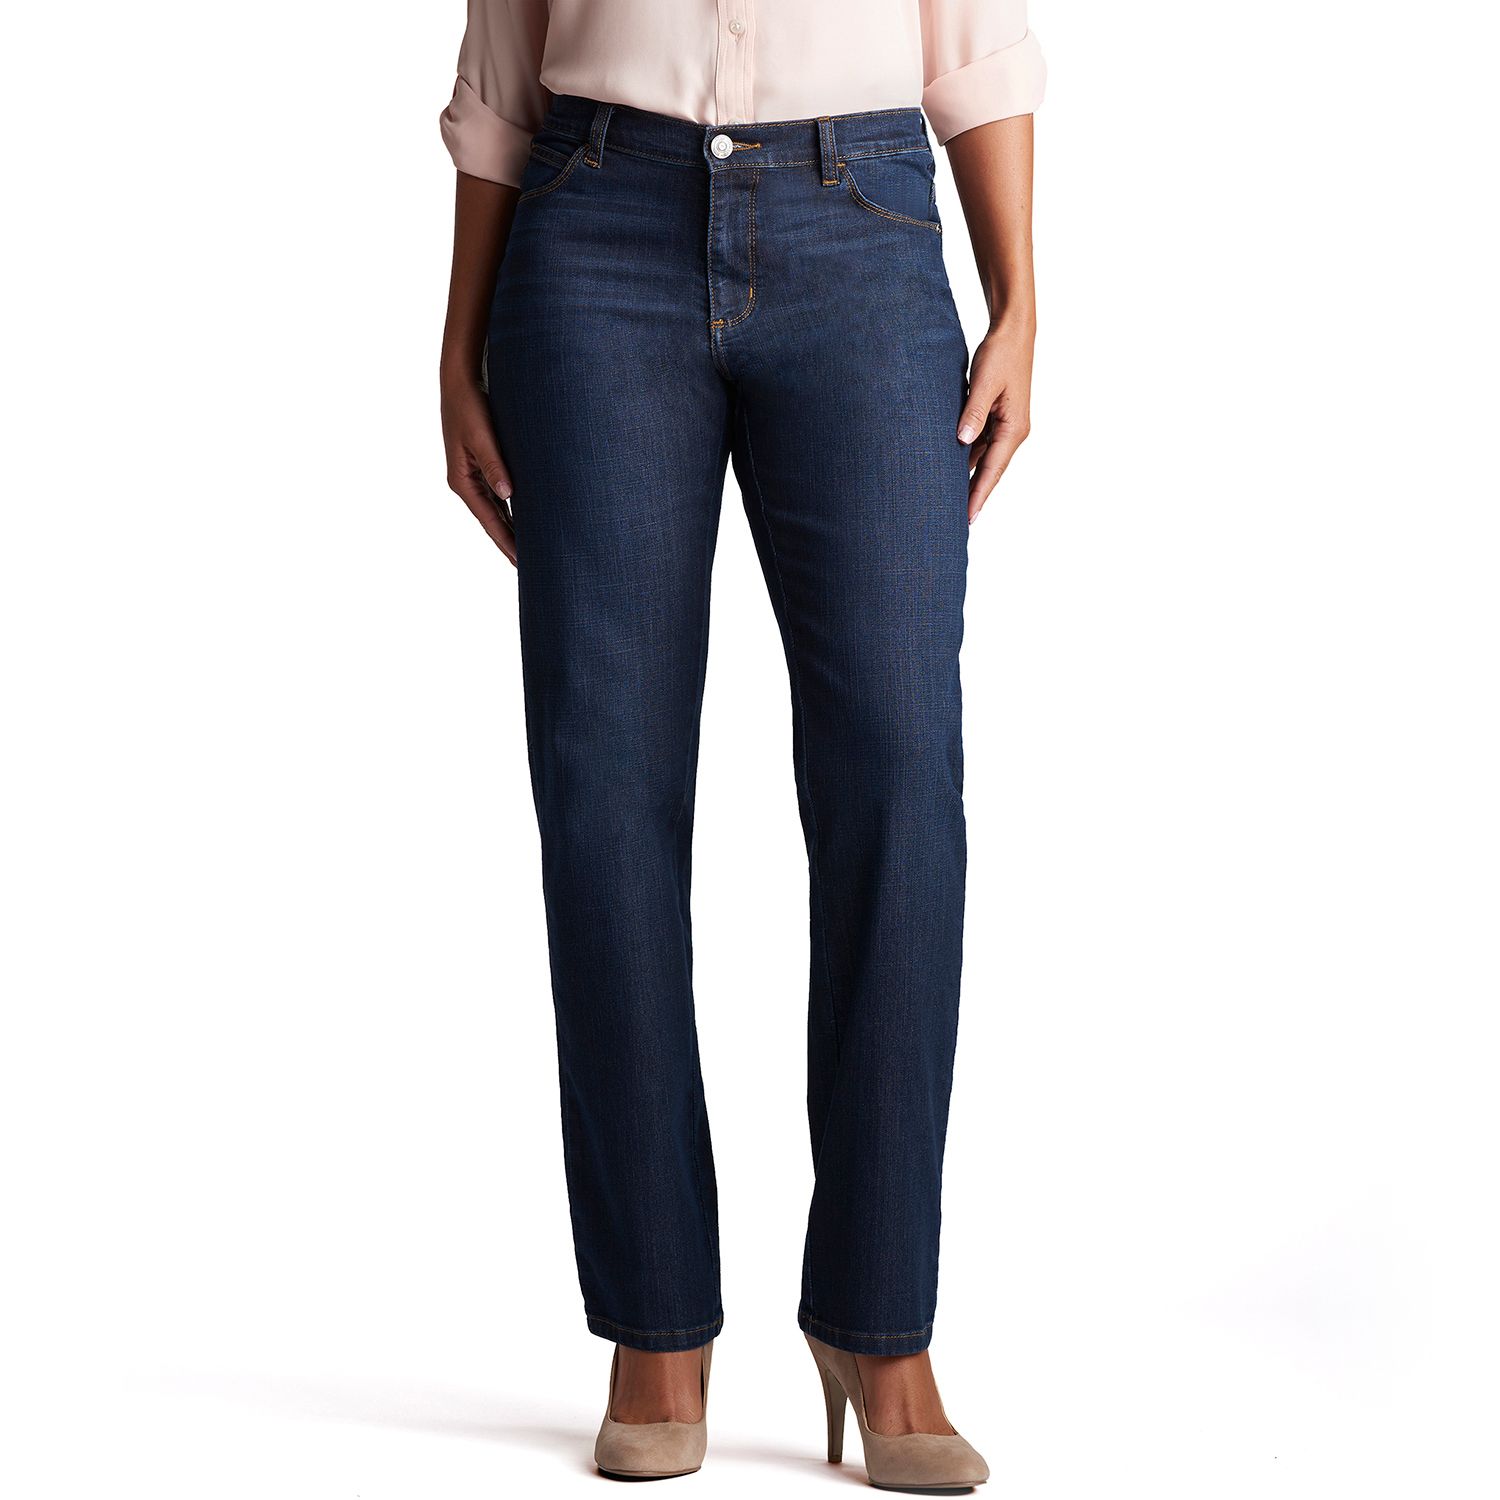 lee perfect fit jeans just below the waist